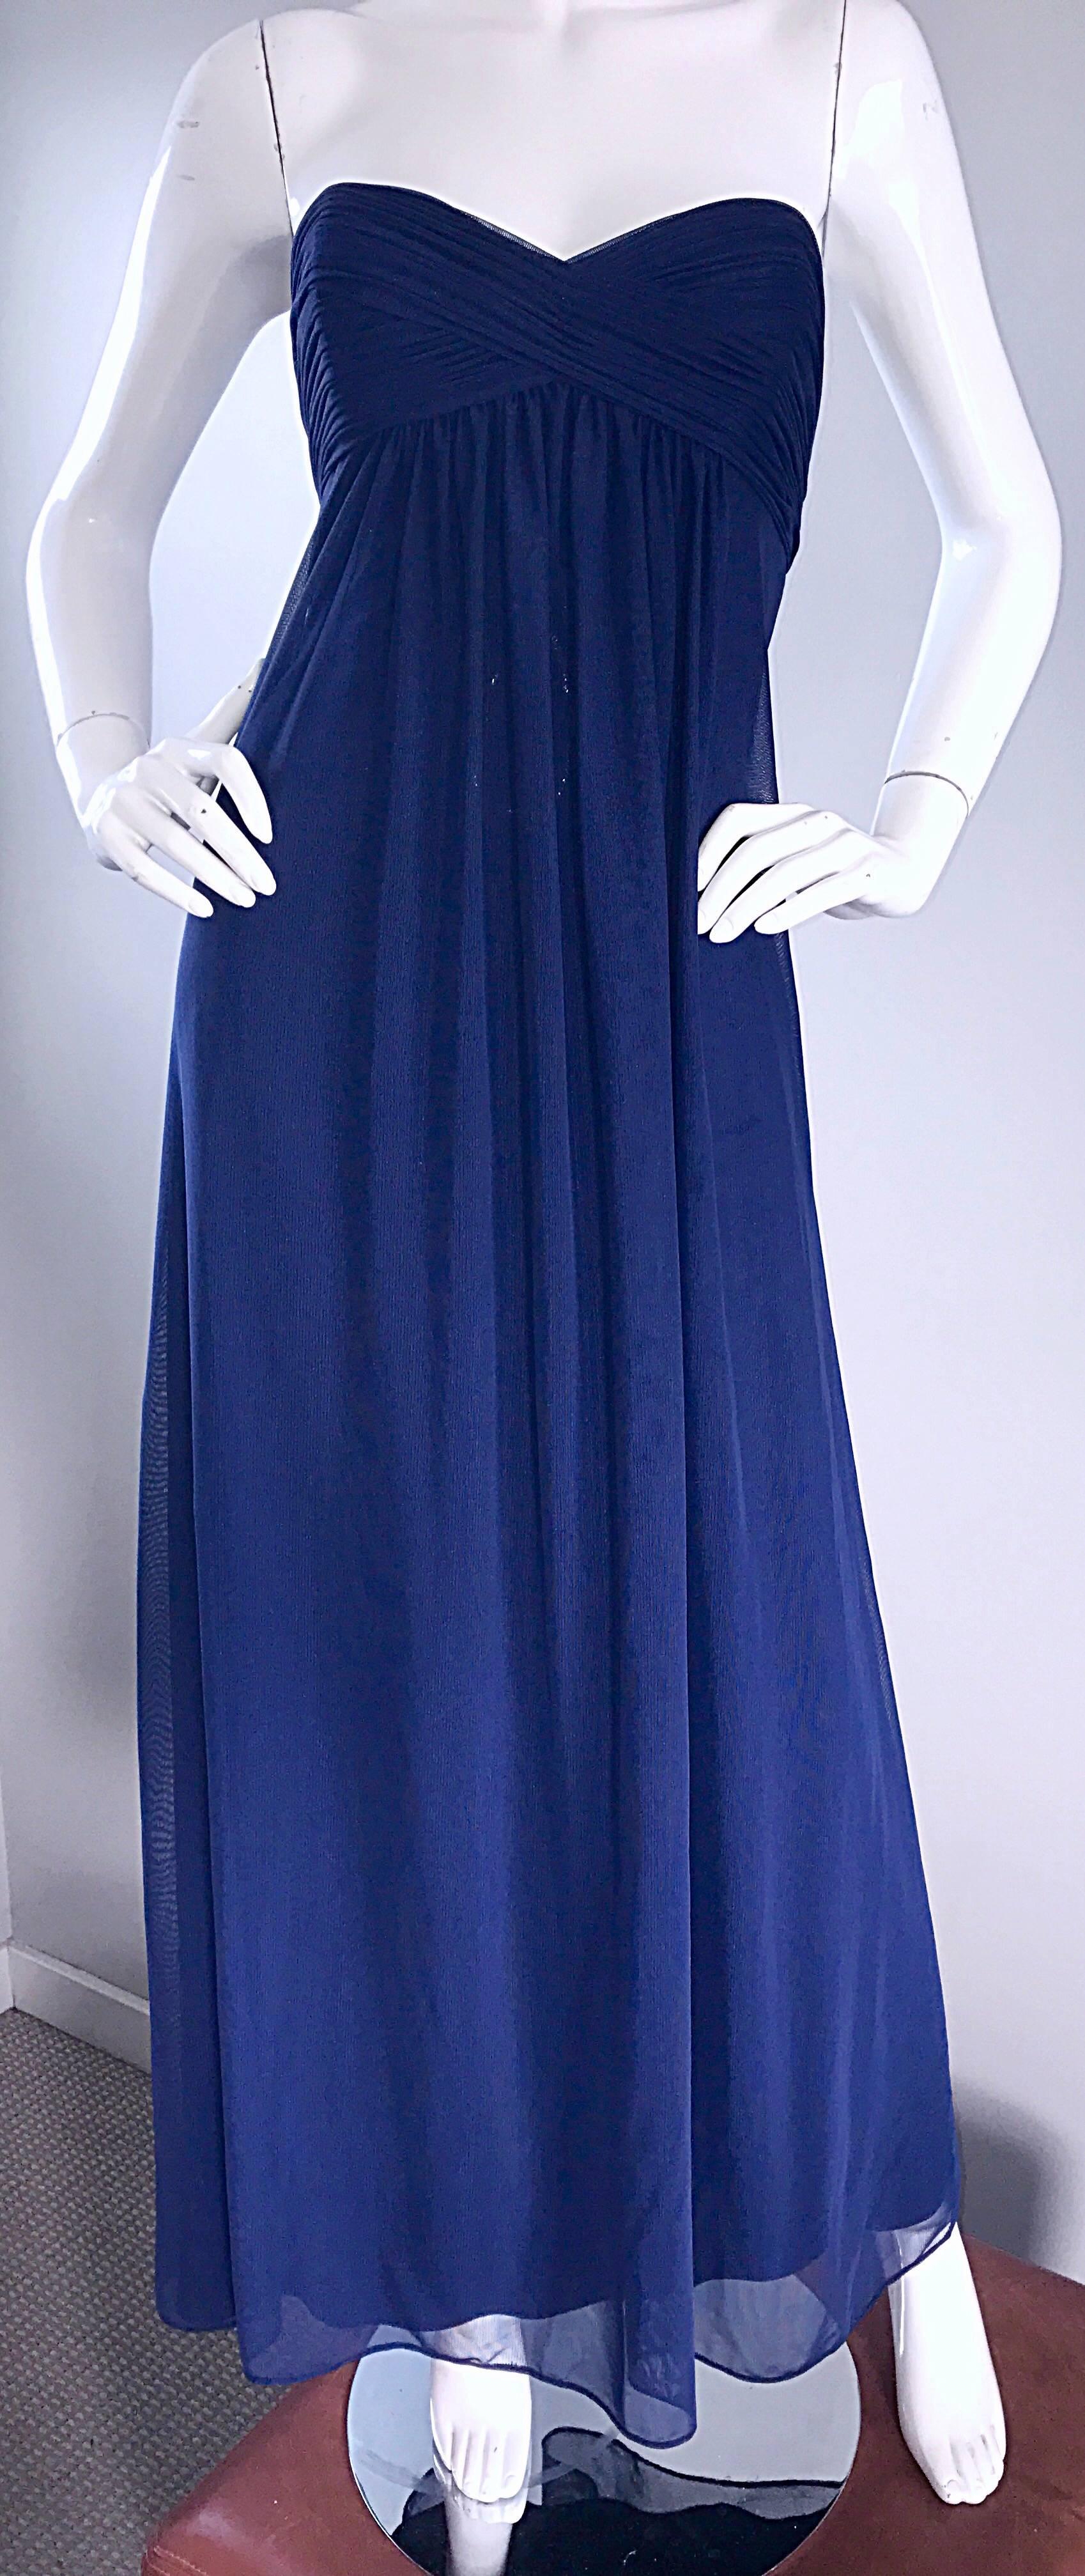 Vintage Vicky Tiel Couture Navy Blue Strapless Silk and Mesh Gown Evening Dress For Sale 2